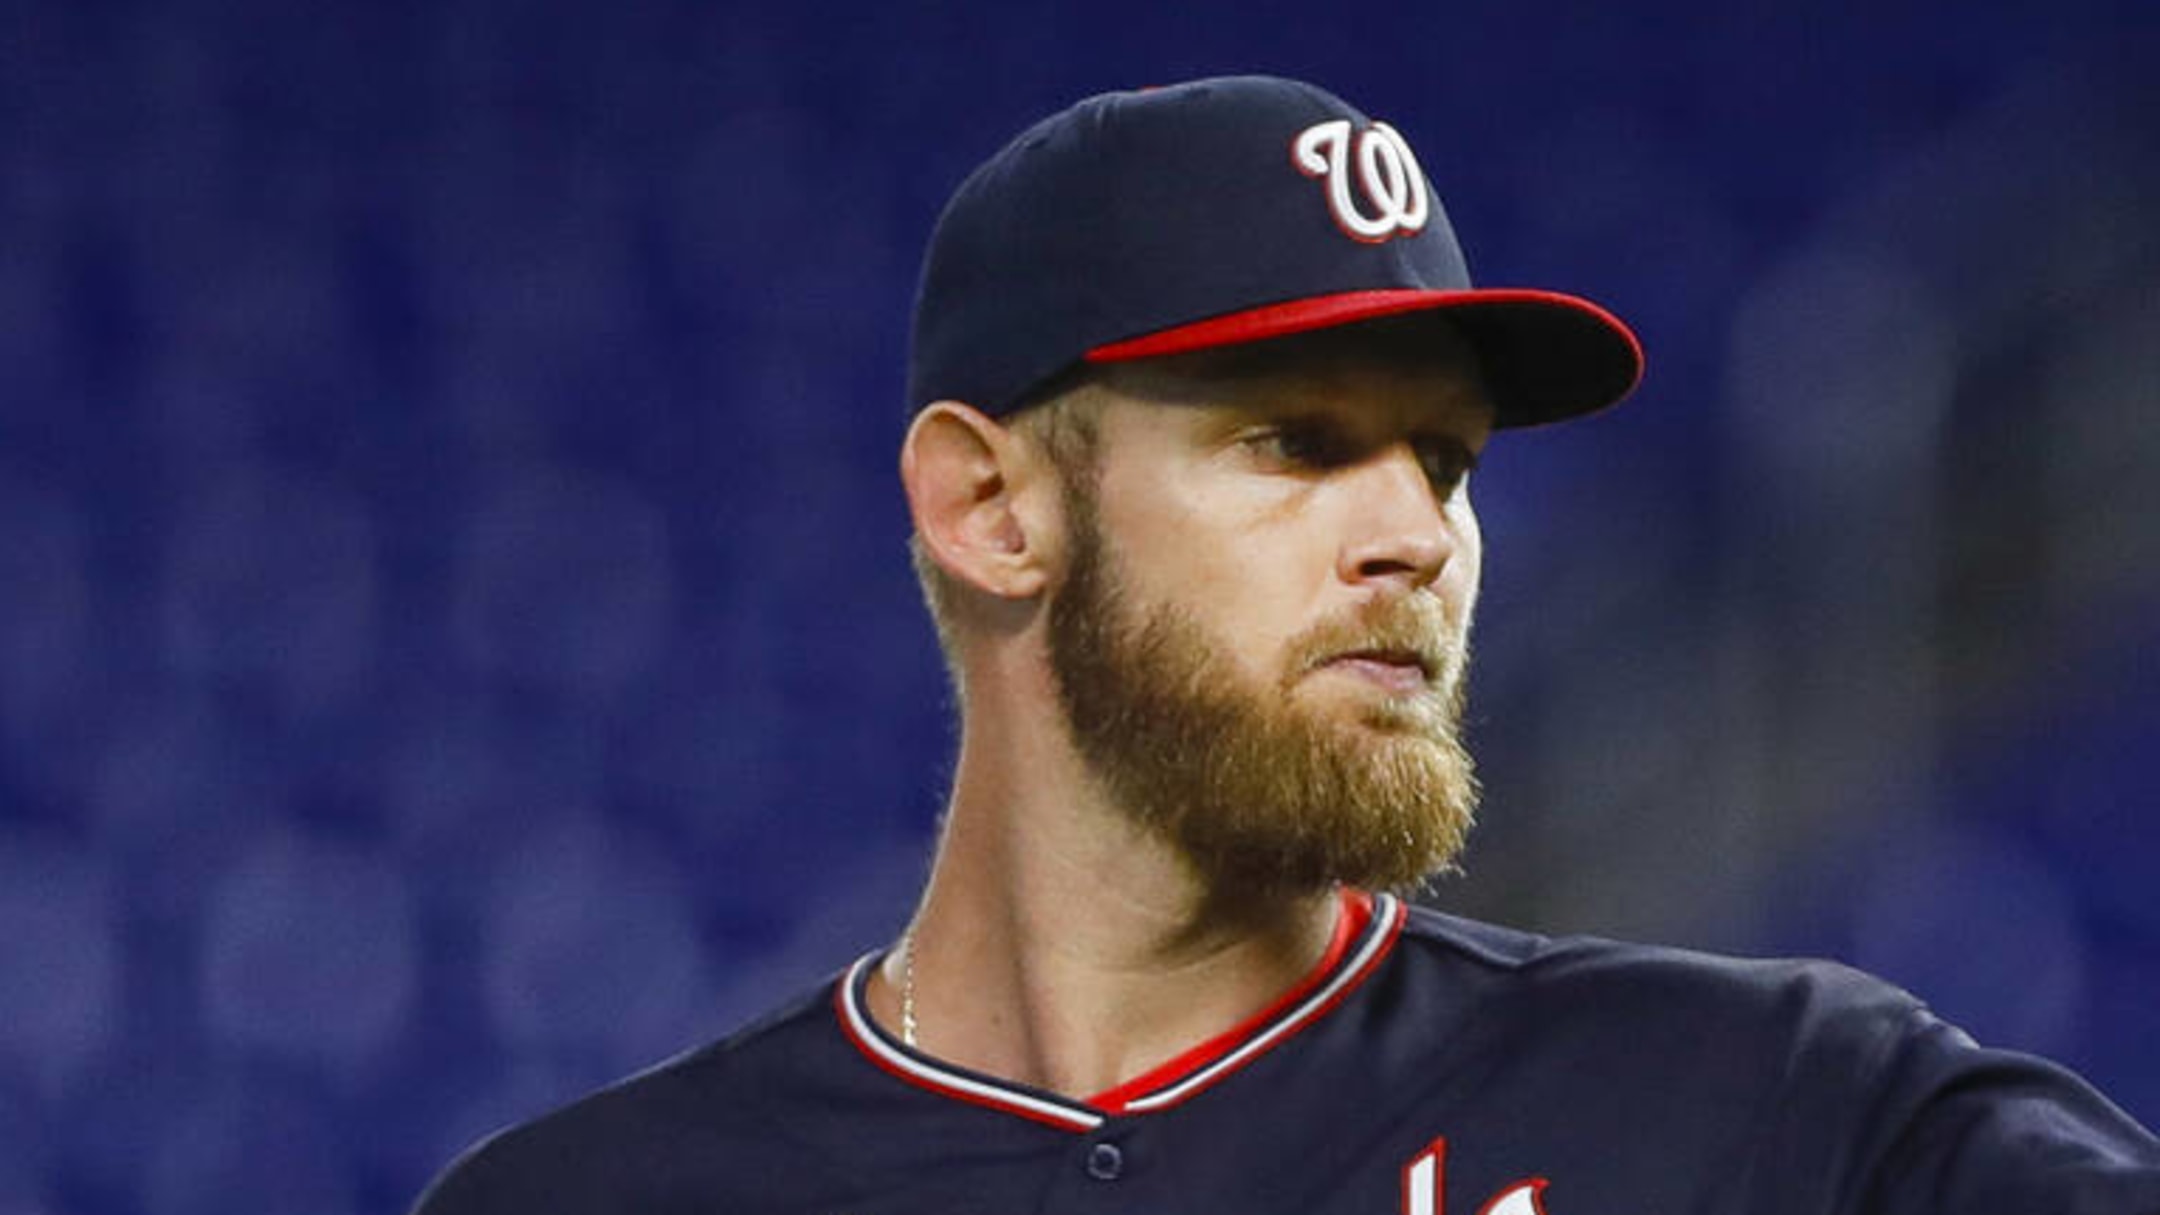 Nationals' Strasburg doesn't report to spring training following setback